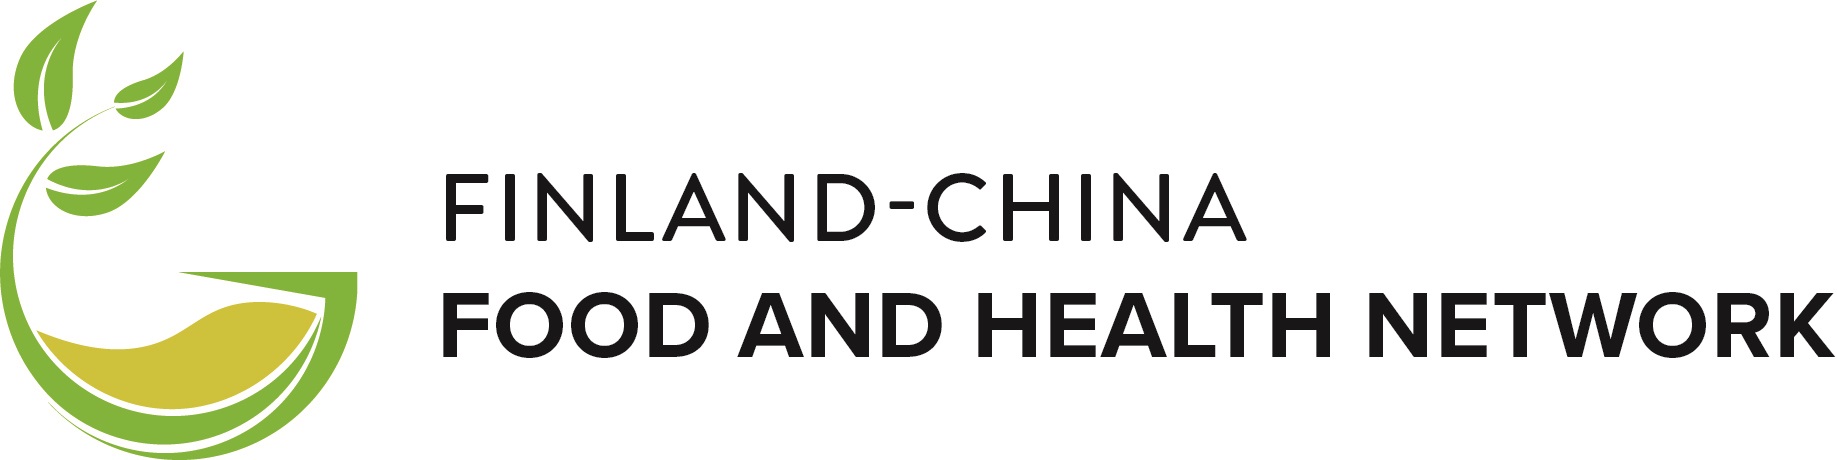 Finland-China Food and Health Network